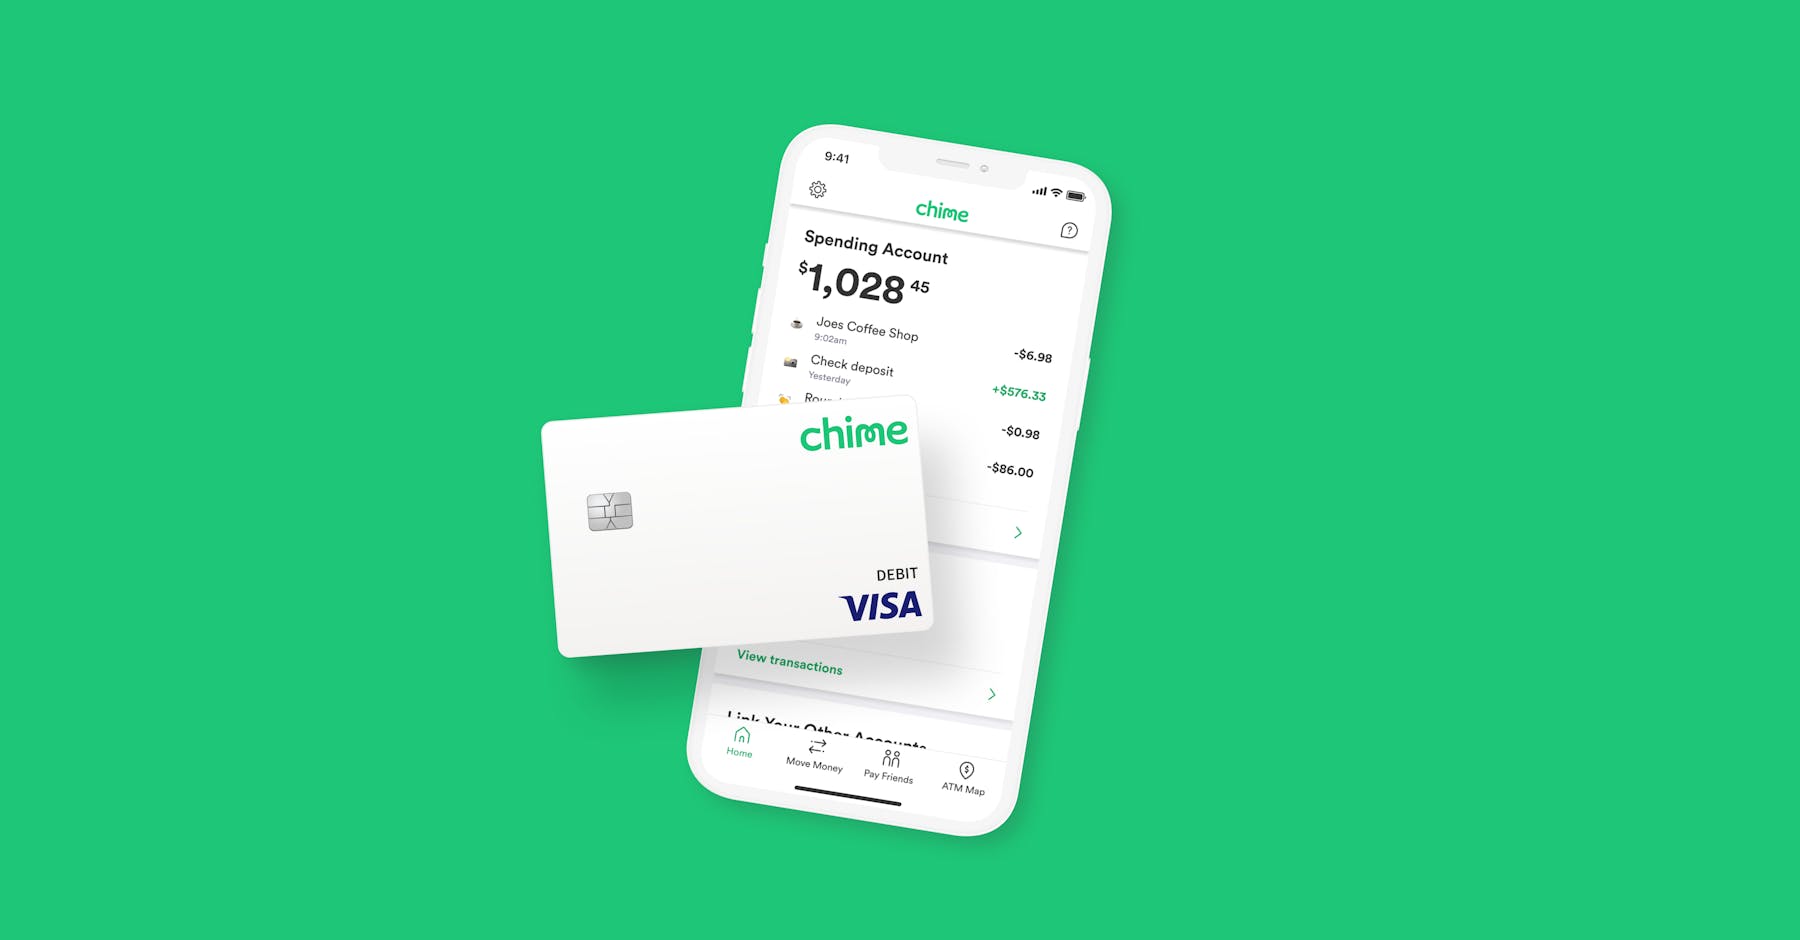 chime card not supported on cash app